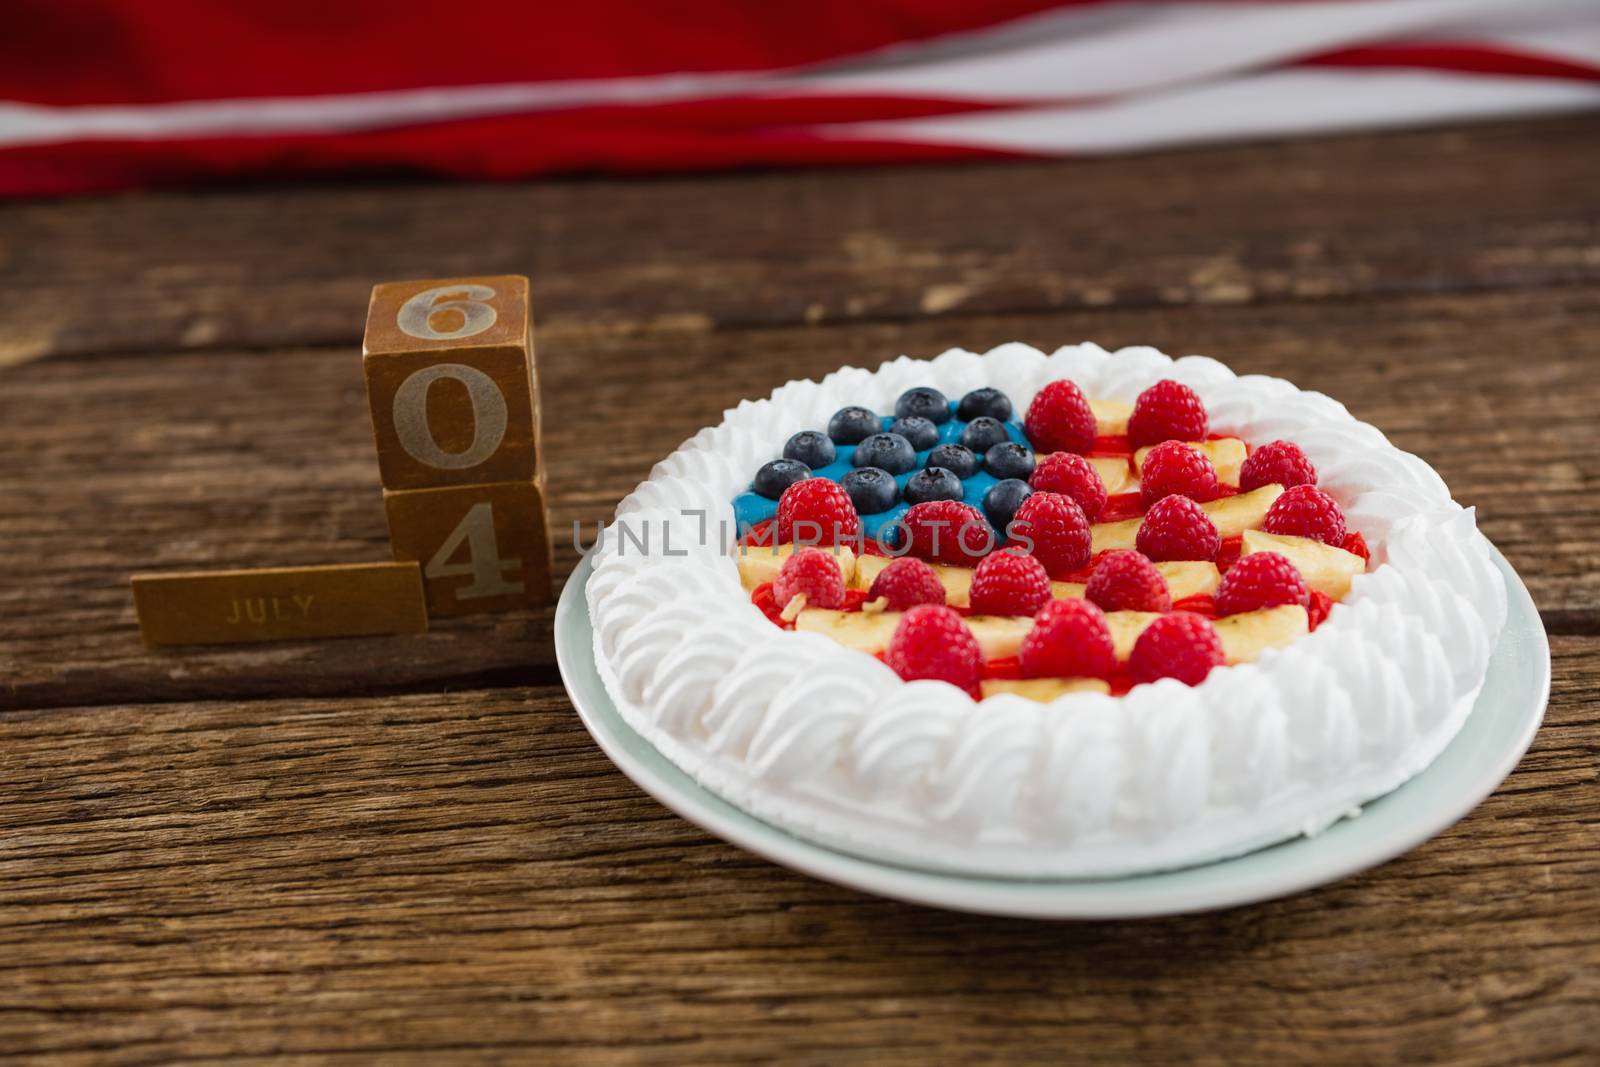 Date blocks and fruitcake on wooden table with 4th july theme by Wavebreakmedia